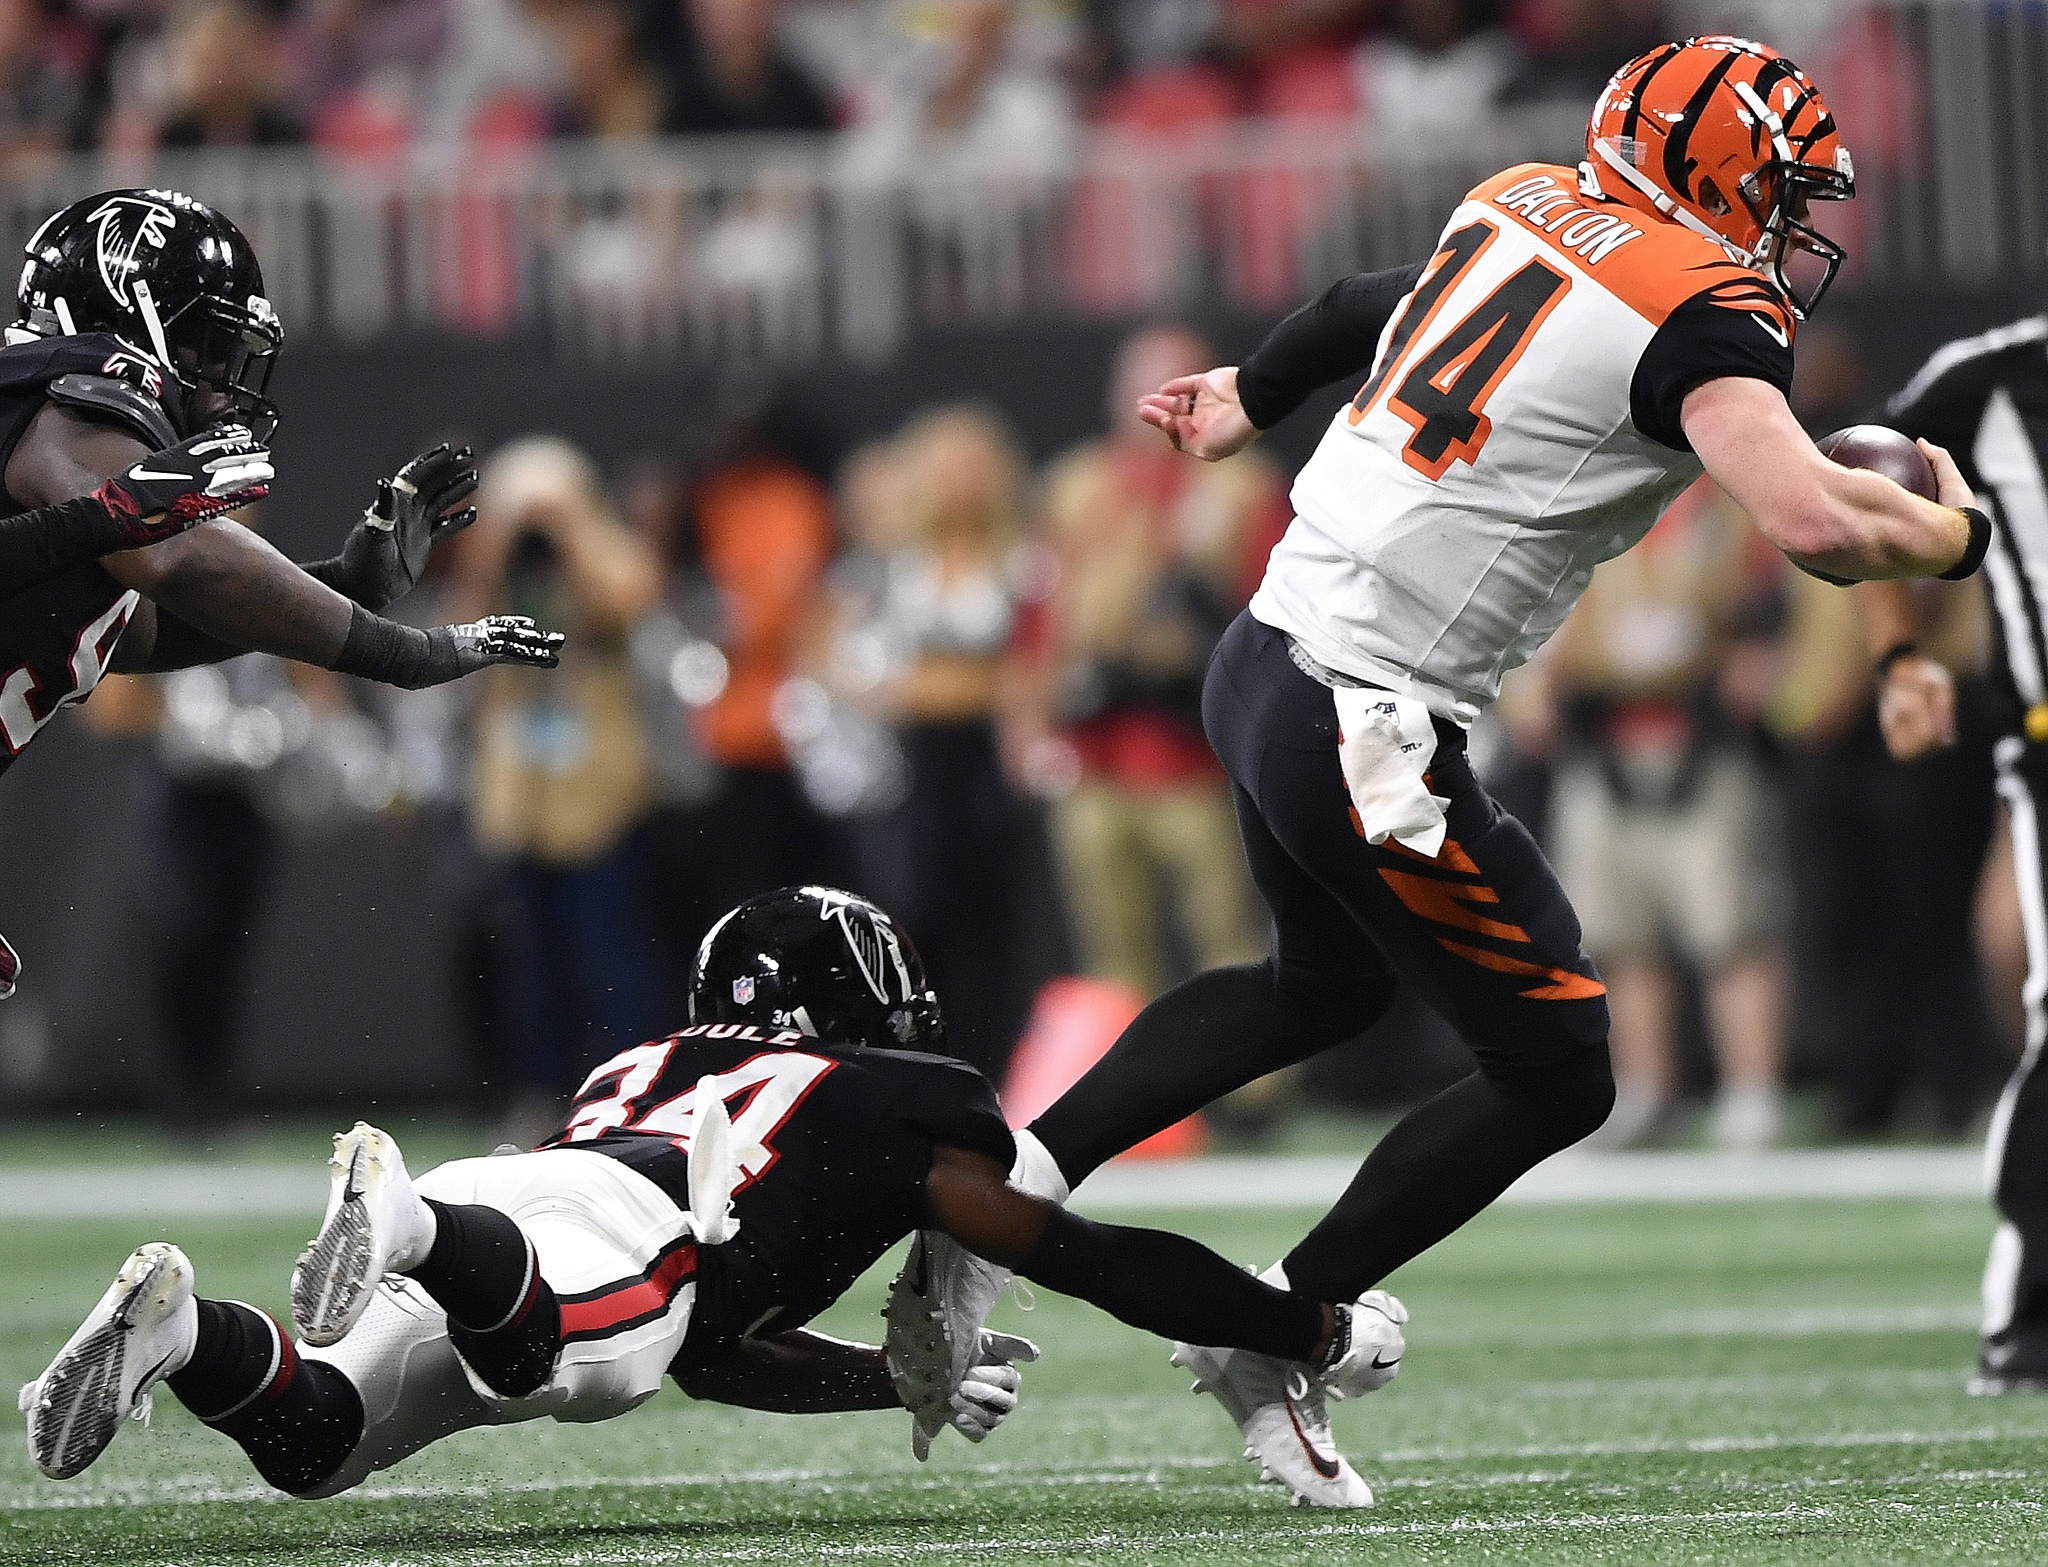 Cincinnati Bengals quarterback is tripped up by Atlanta Falcons cornerback during the second half of an NFL football game.